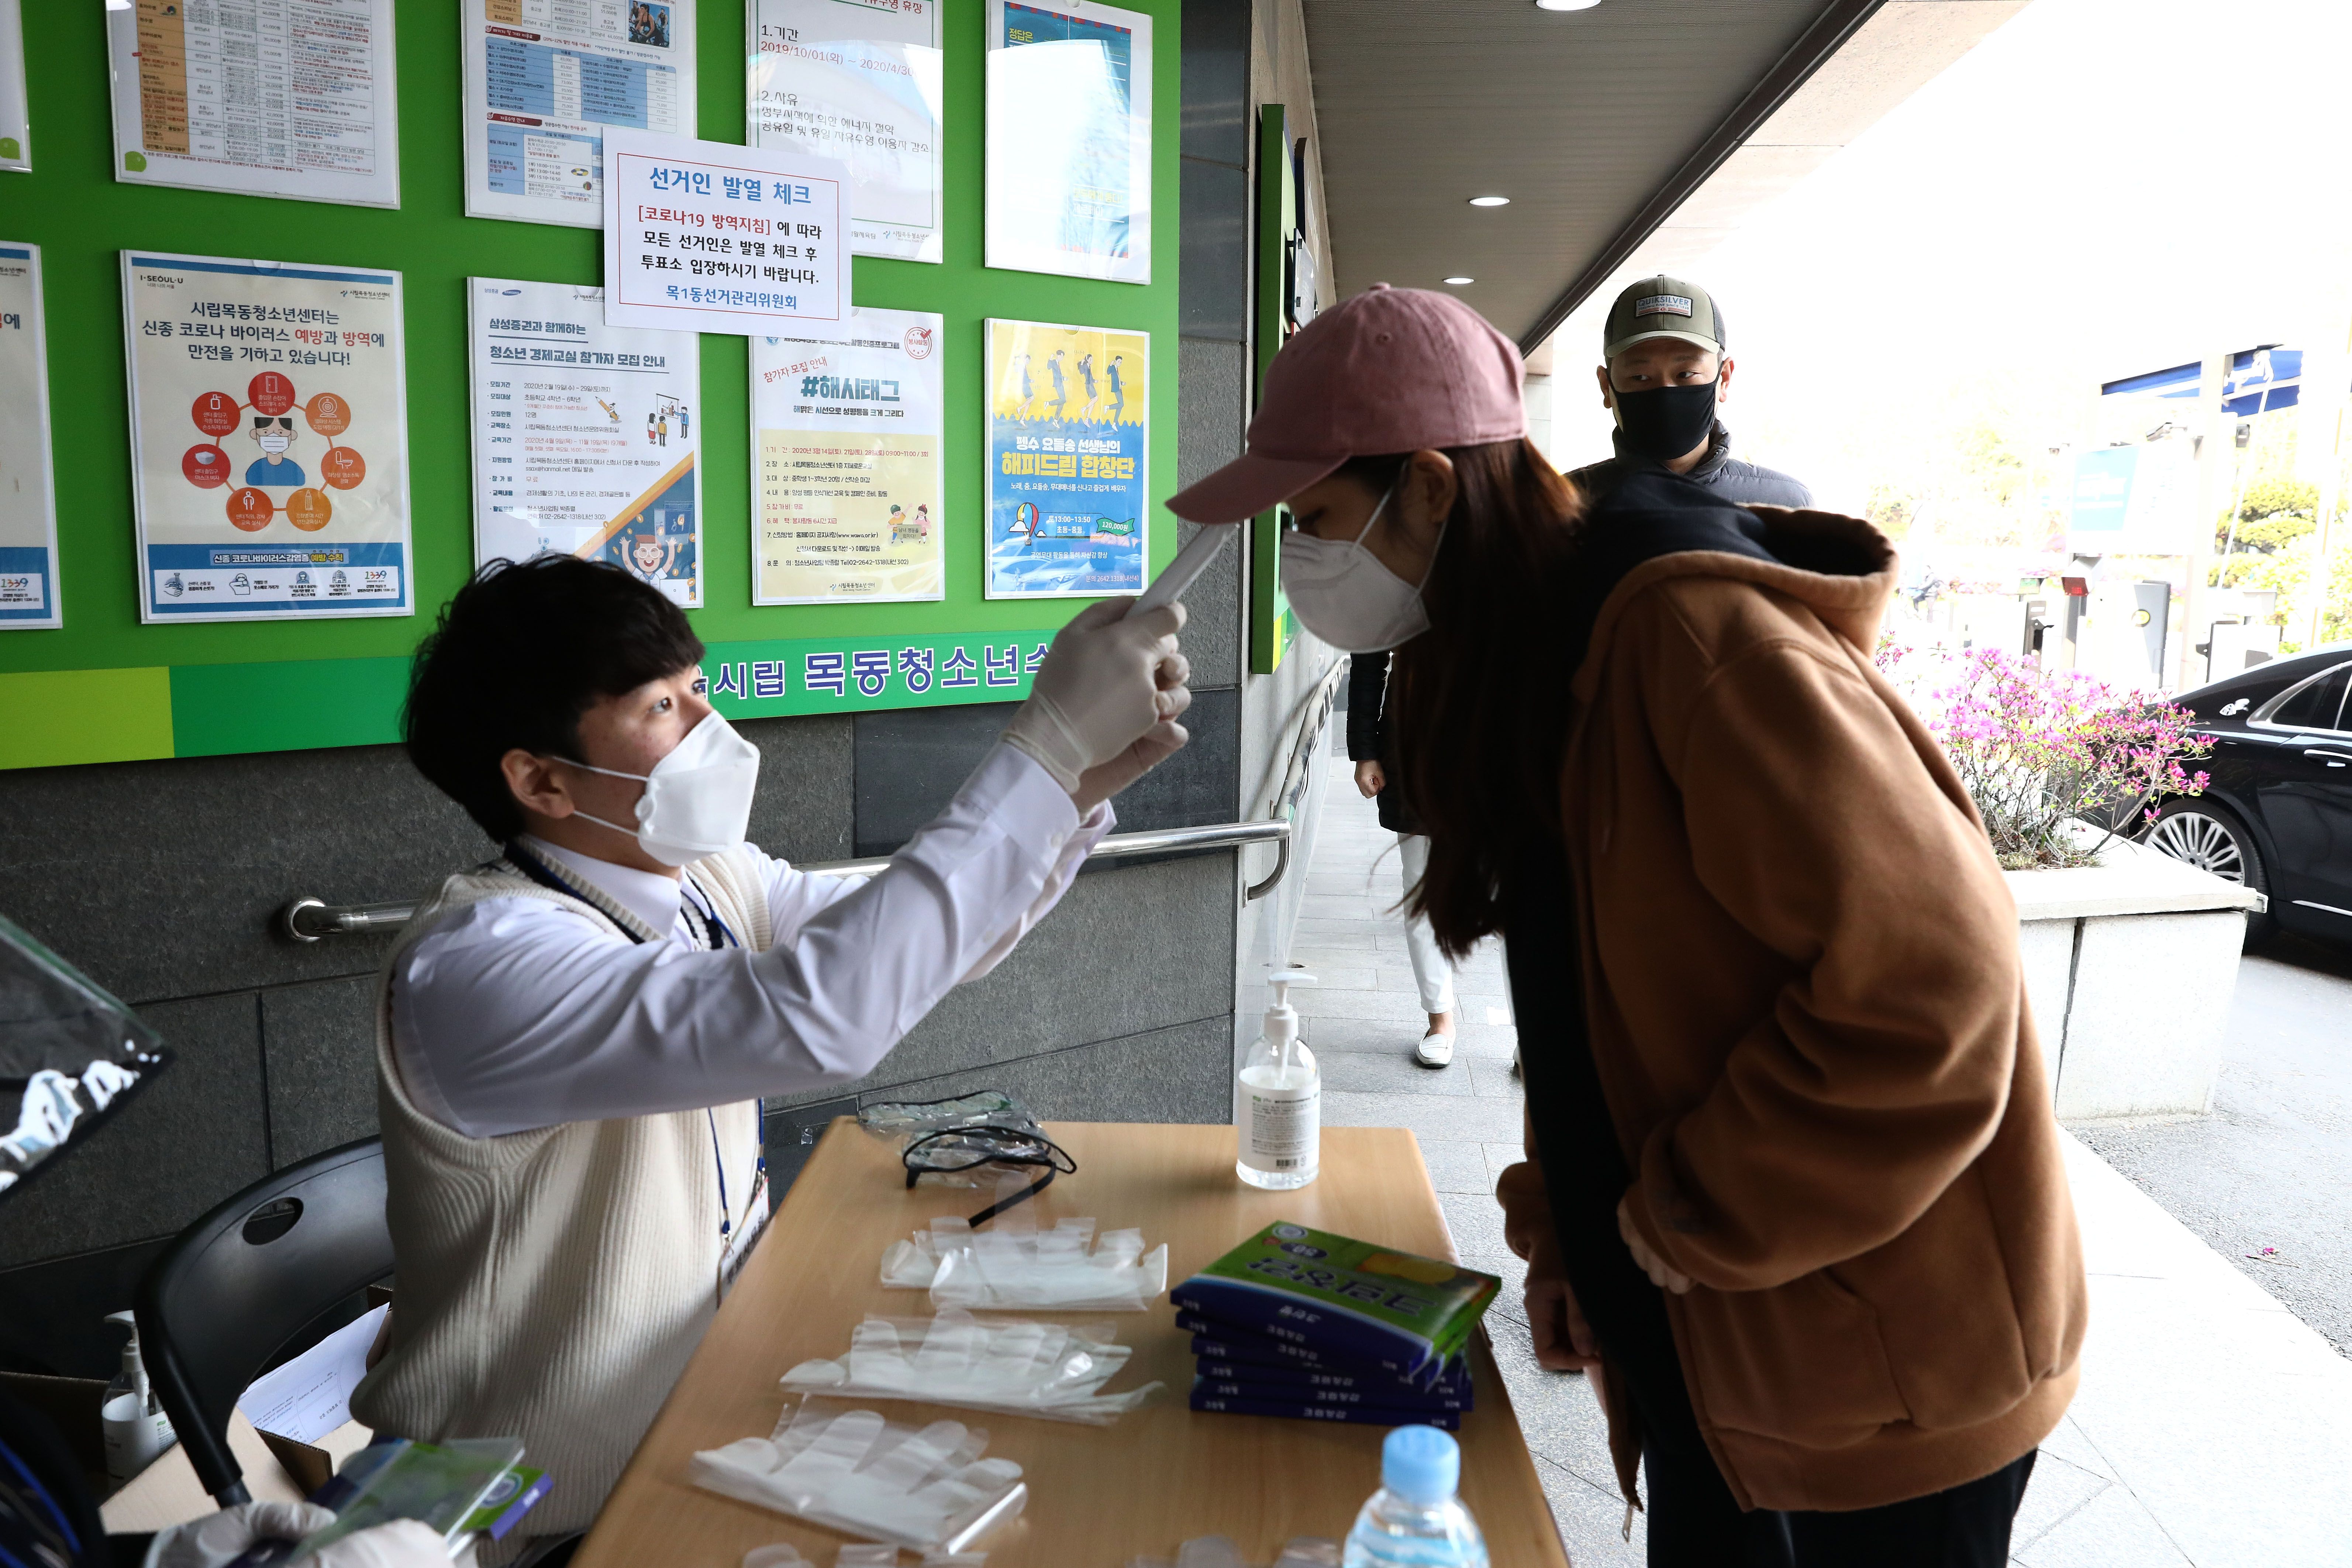 In this image, a woman has her temperature checked while waiting in line to vote 